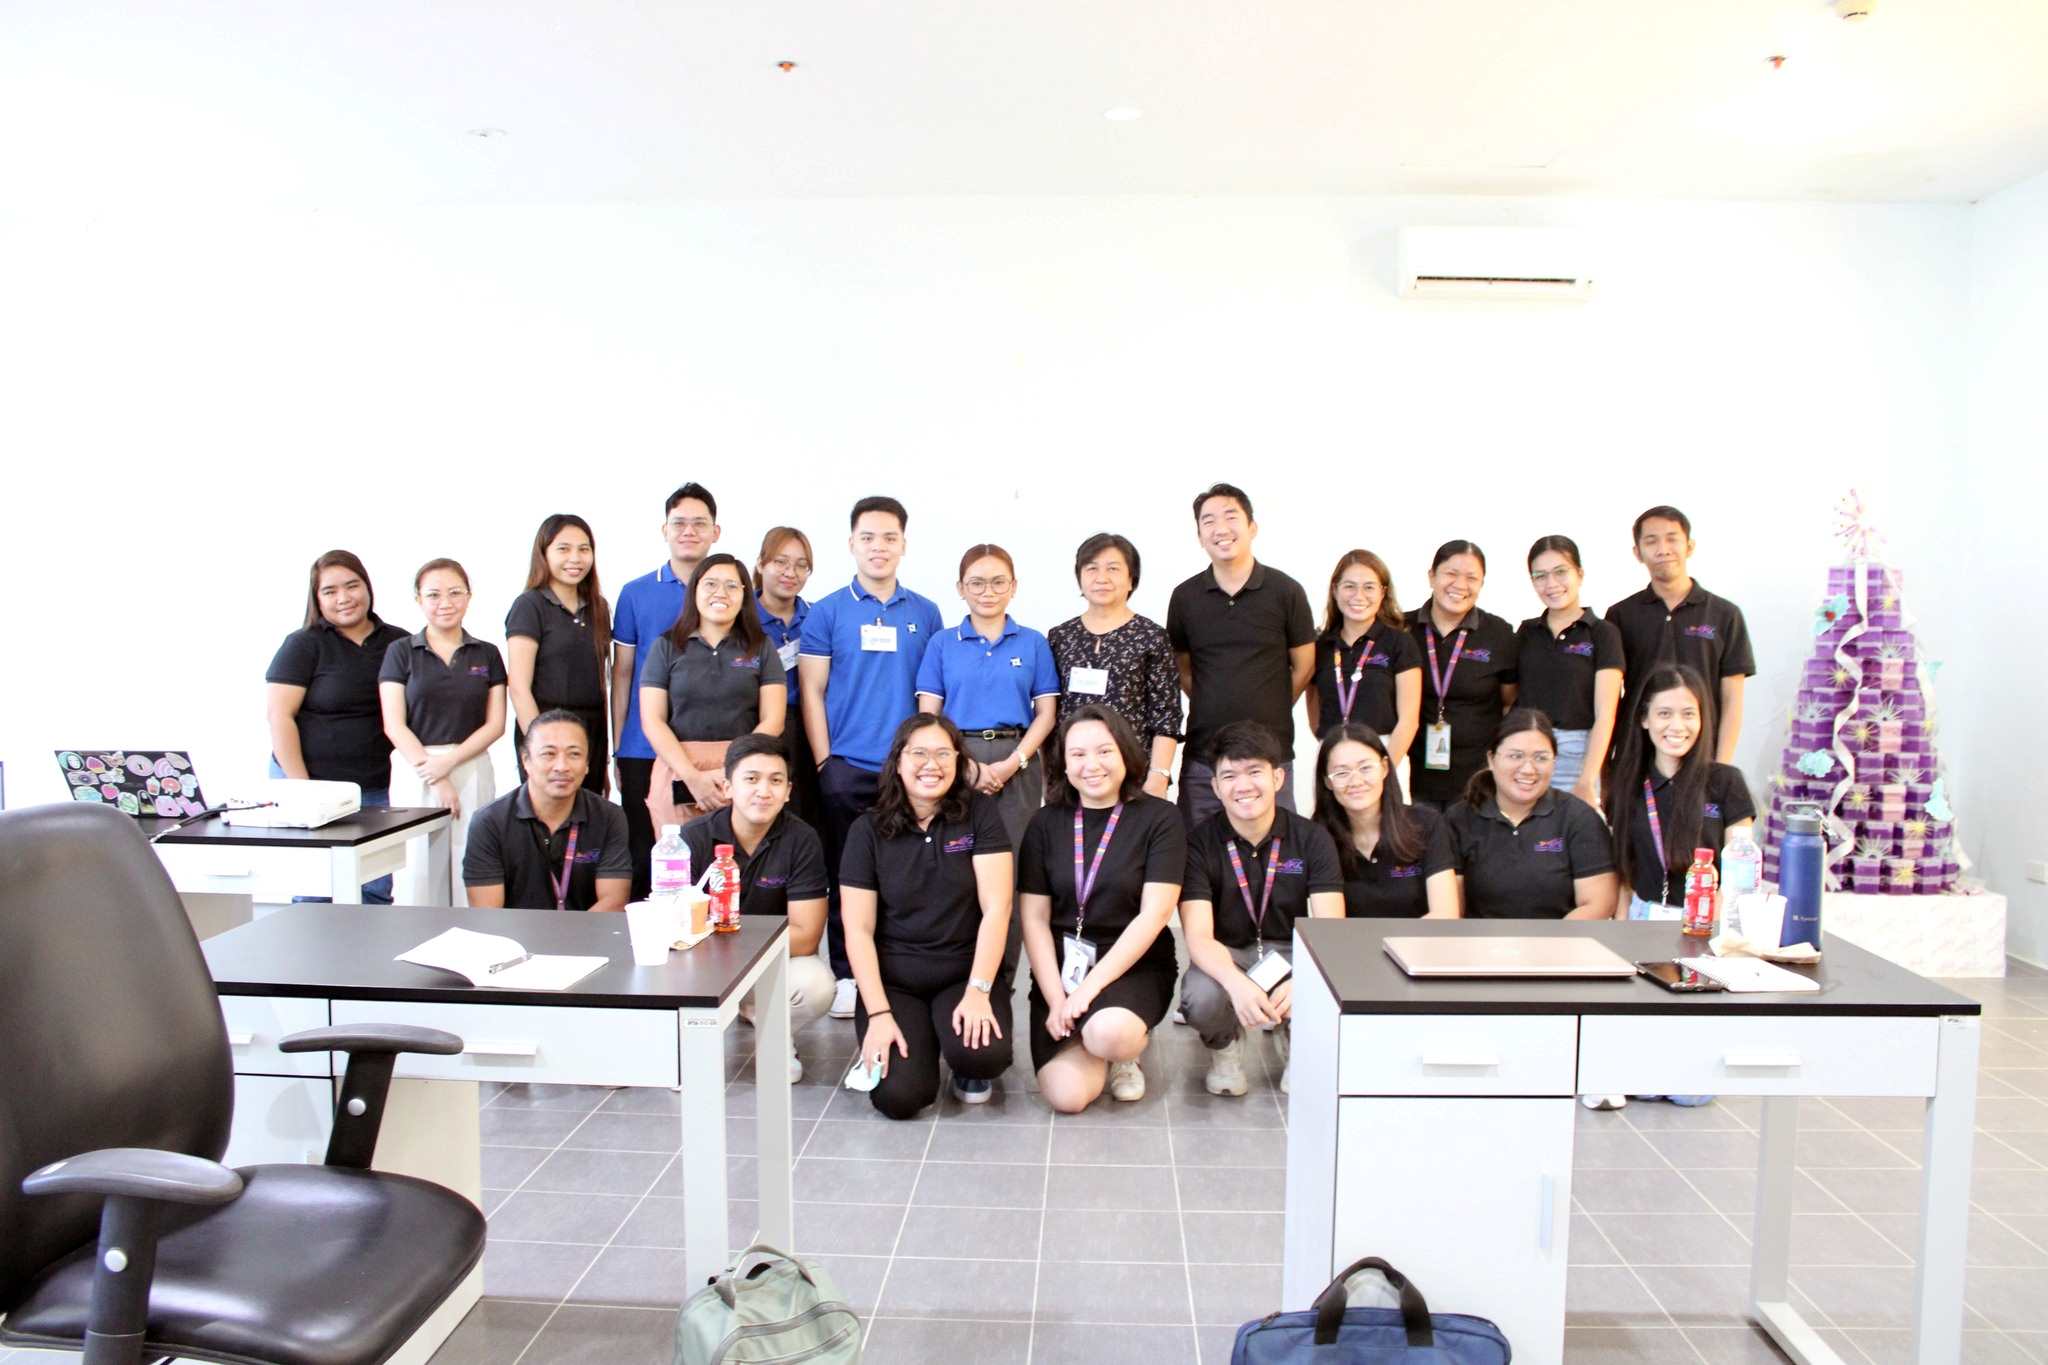 DOST-VIP researchers enhance skills in Whole Genome Sequencing: Library Preparation and Bioinformatics Analysis at PGC Visayas